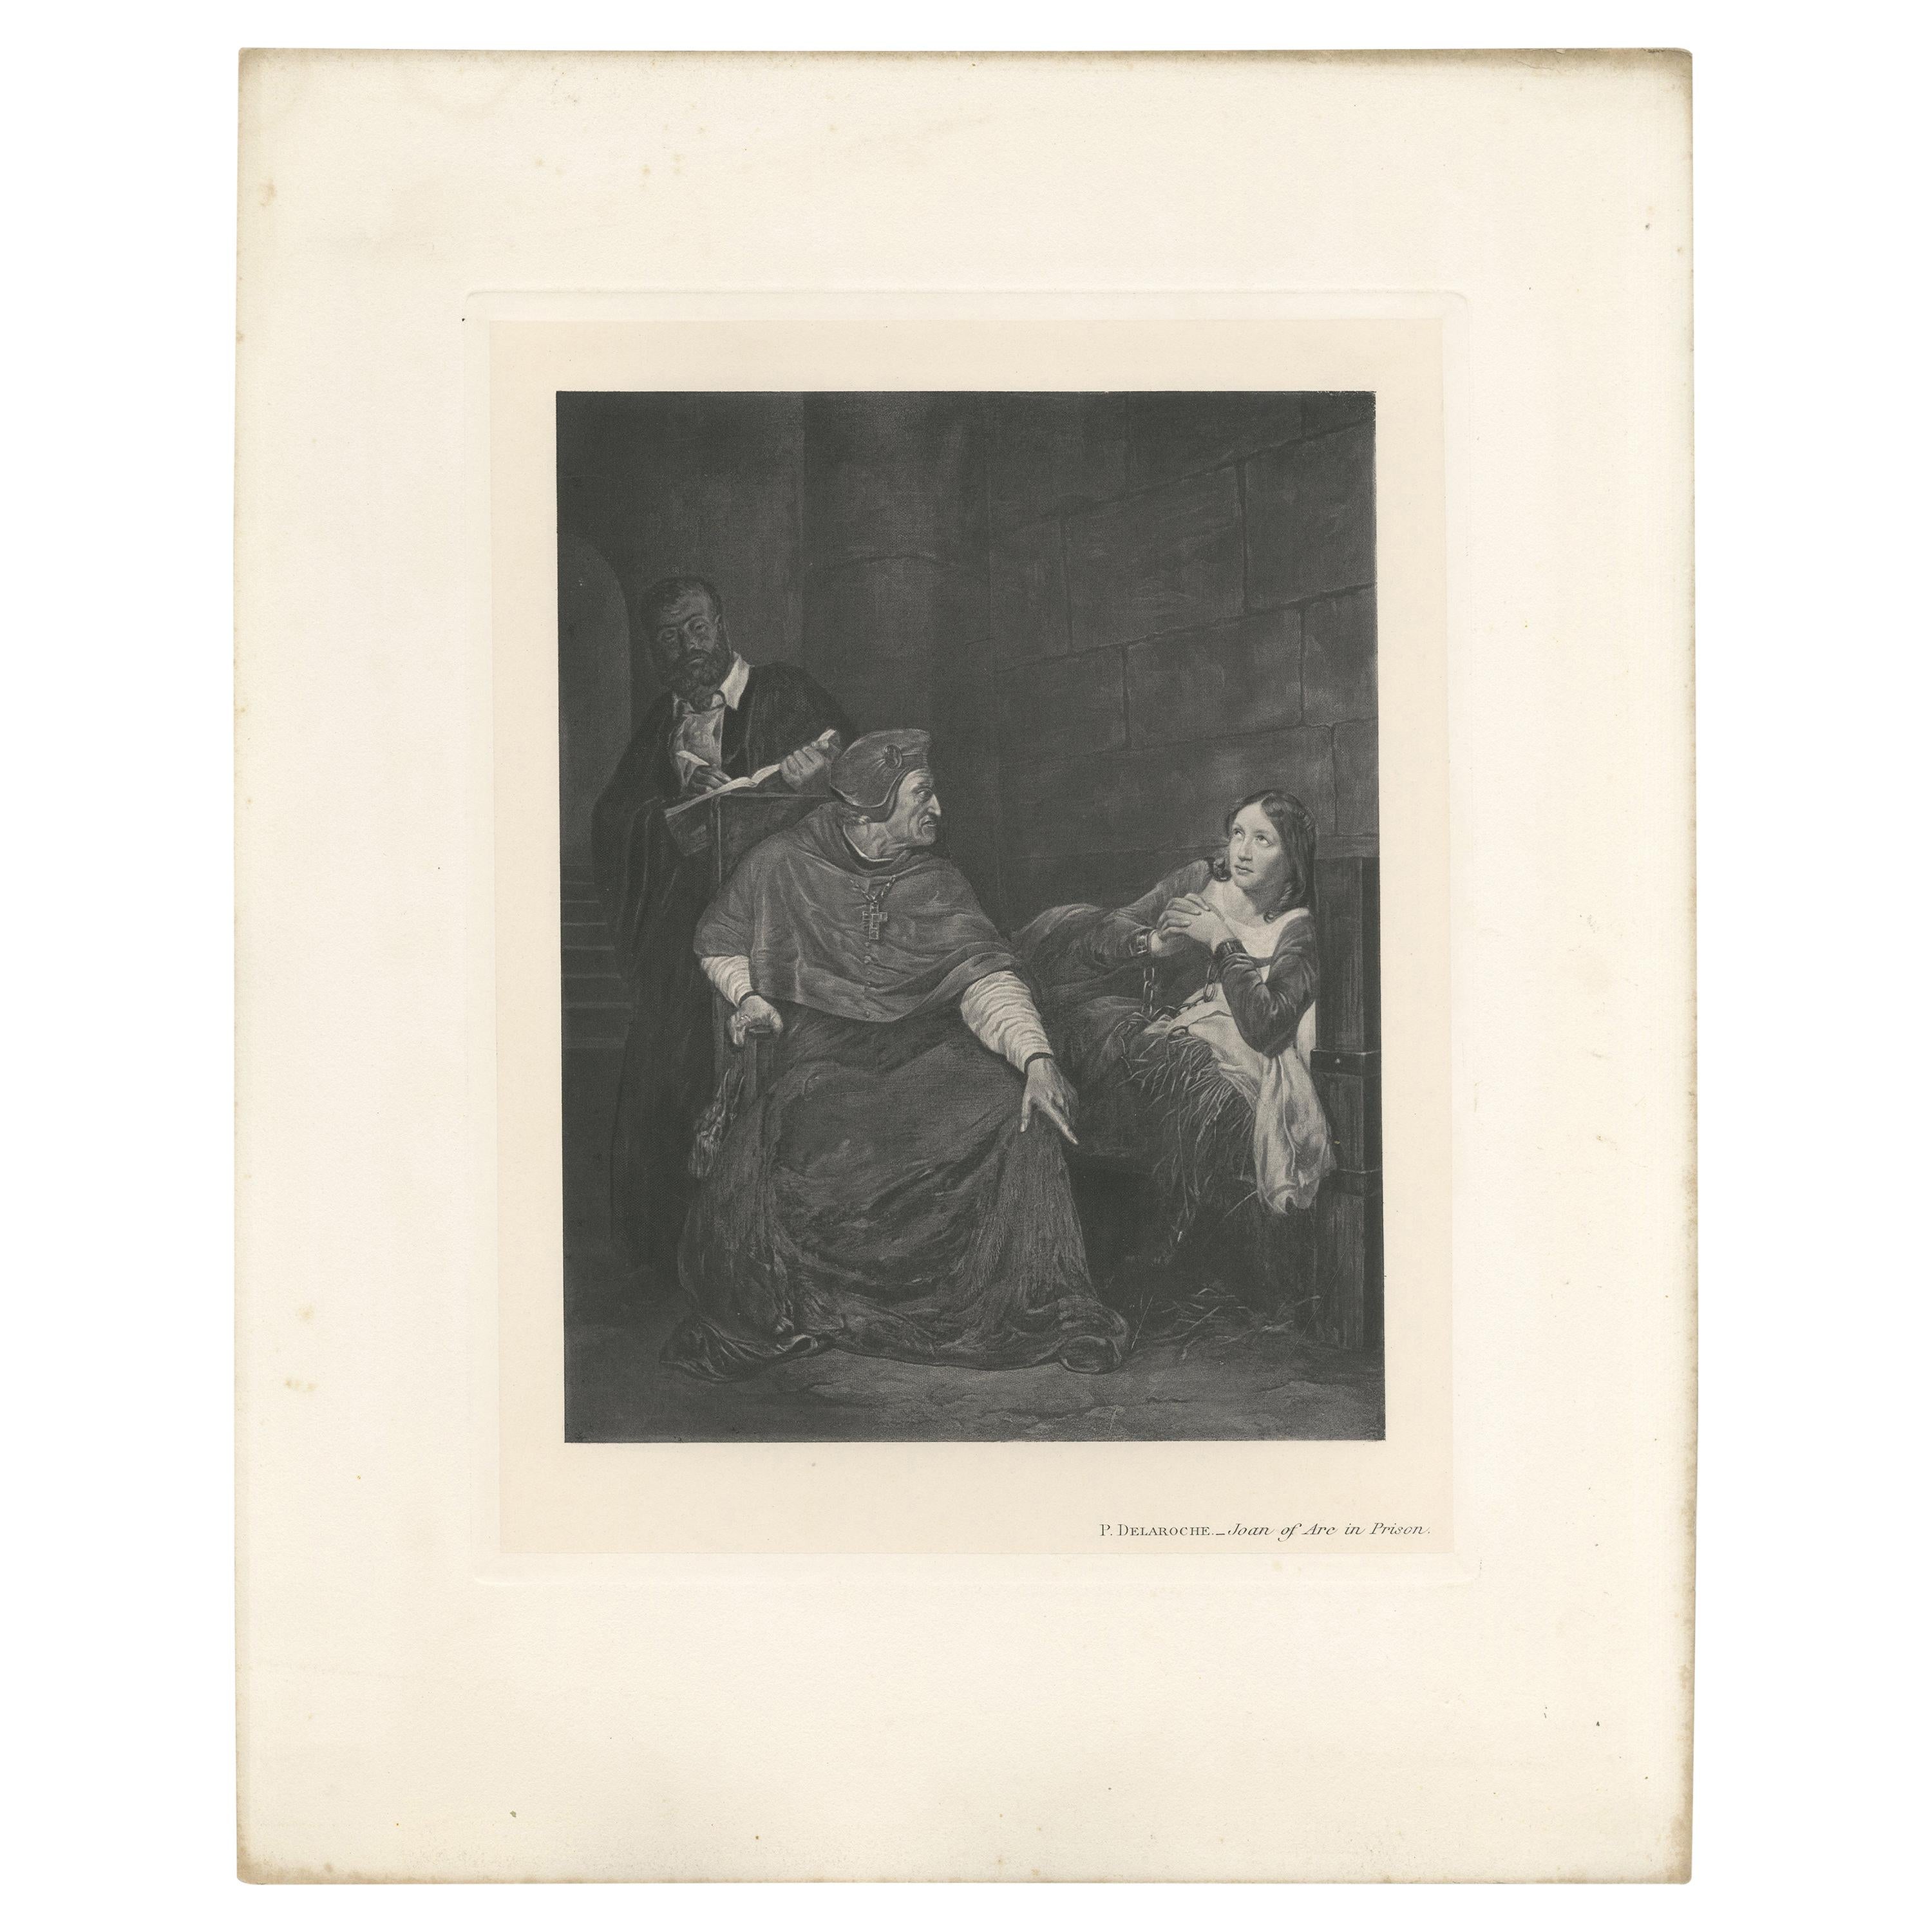 Original Antique Print of 'Joan of Arc in Prison' made after P. Delaroche (1902) For Sale